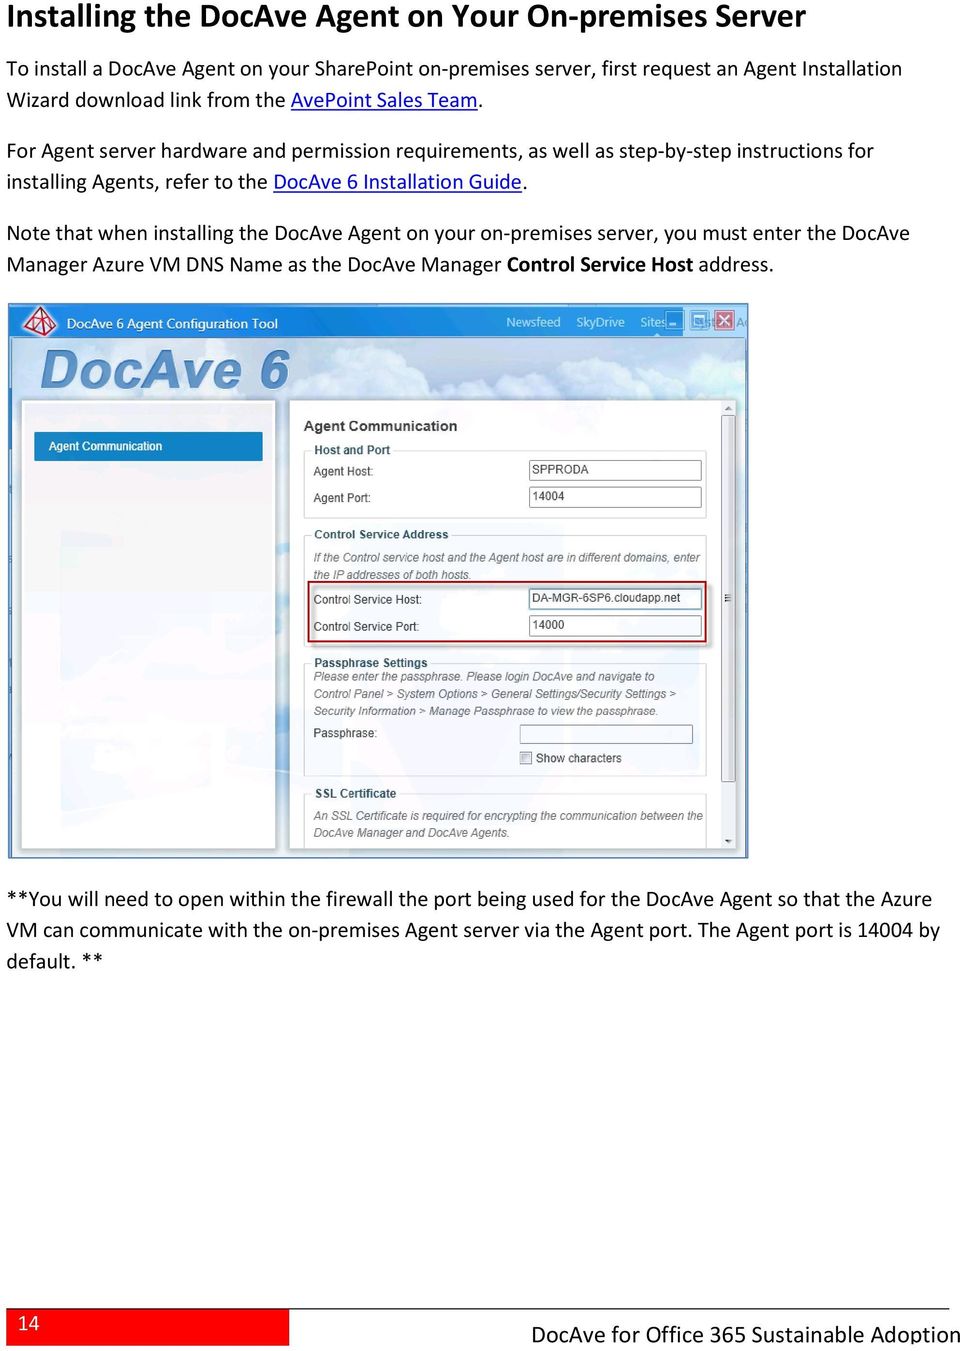 Note that when installing the DocAve Agent on your on-premises server, you must enter the DocAve Manager Azure VM DNS Name as the DocAve Manager Control Service Host address.